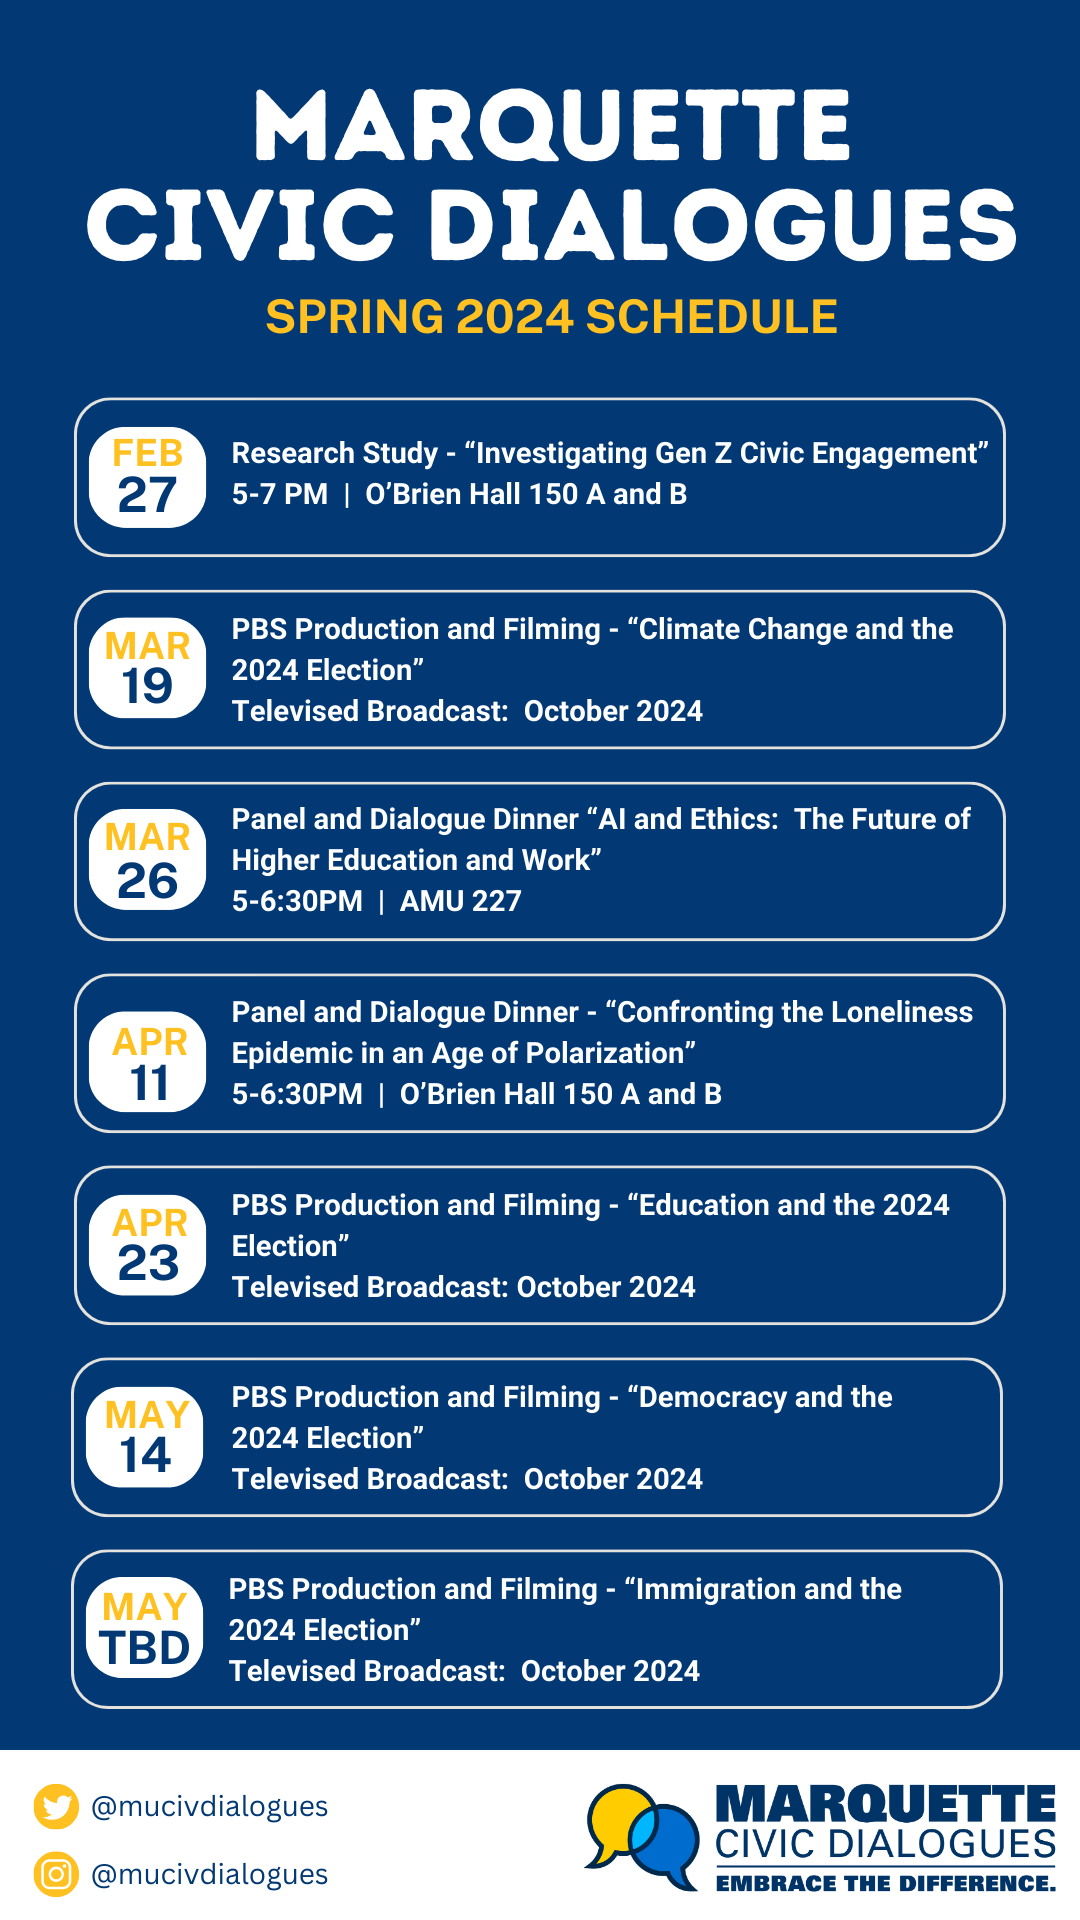 Calendar of Marquette Dialogues' spring 2024 events.